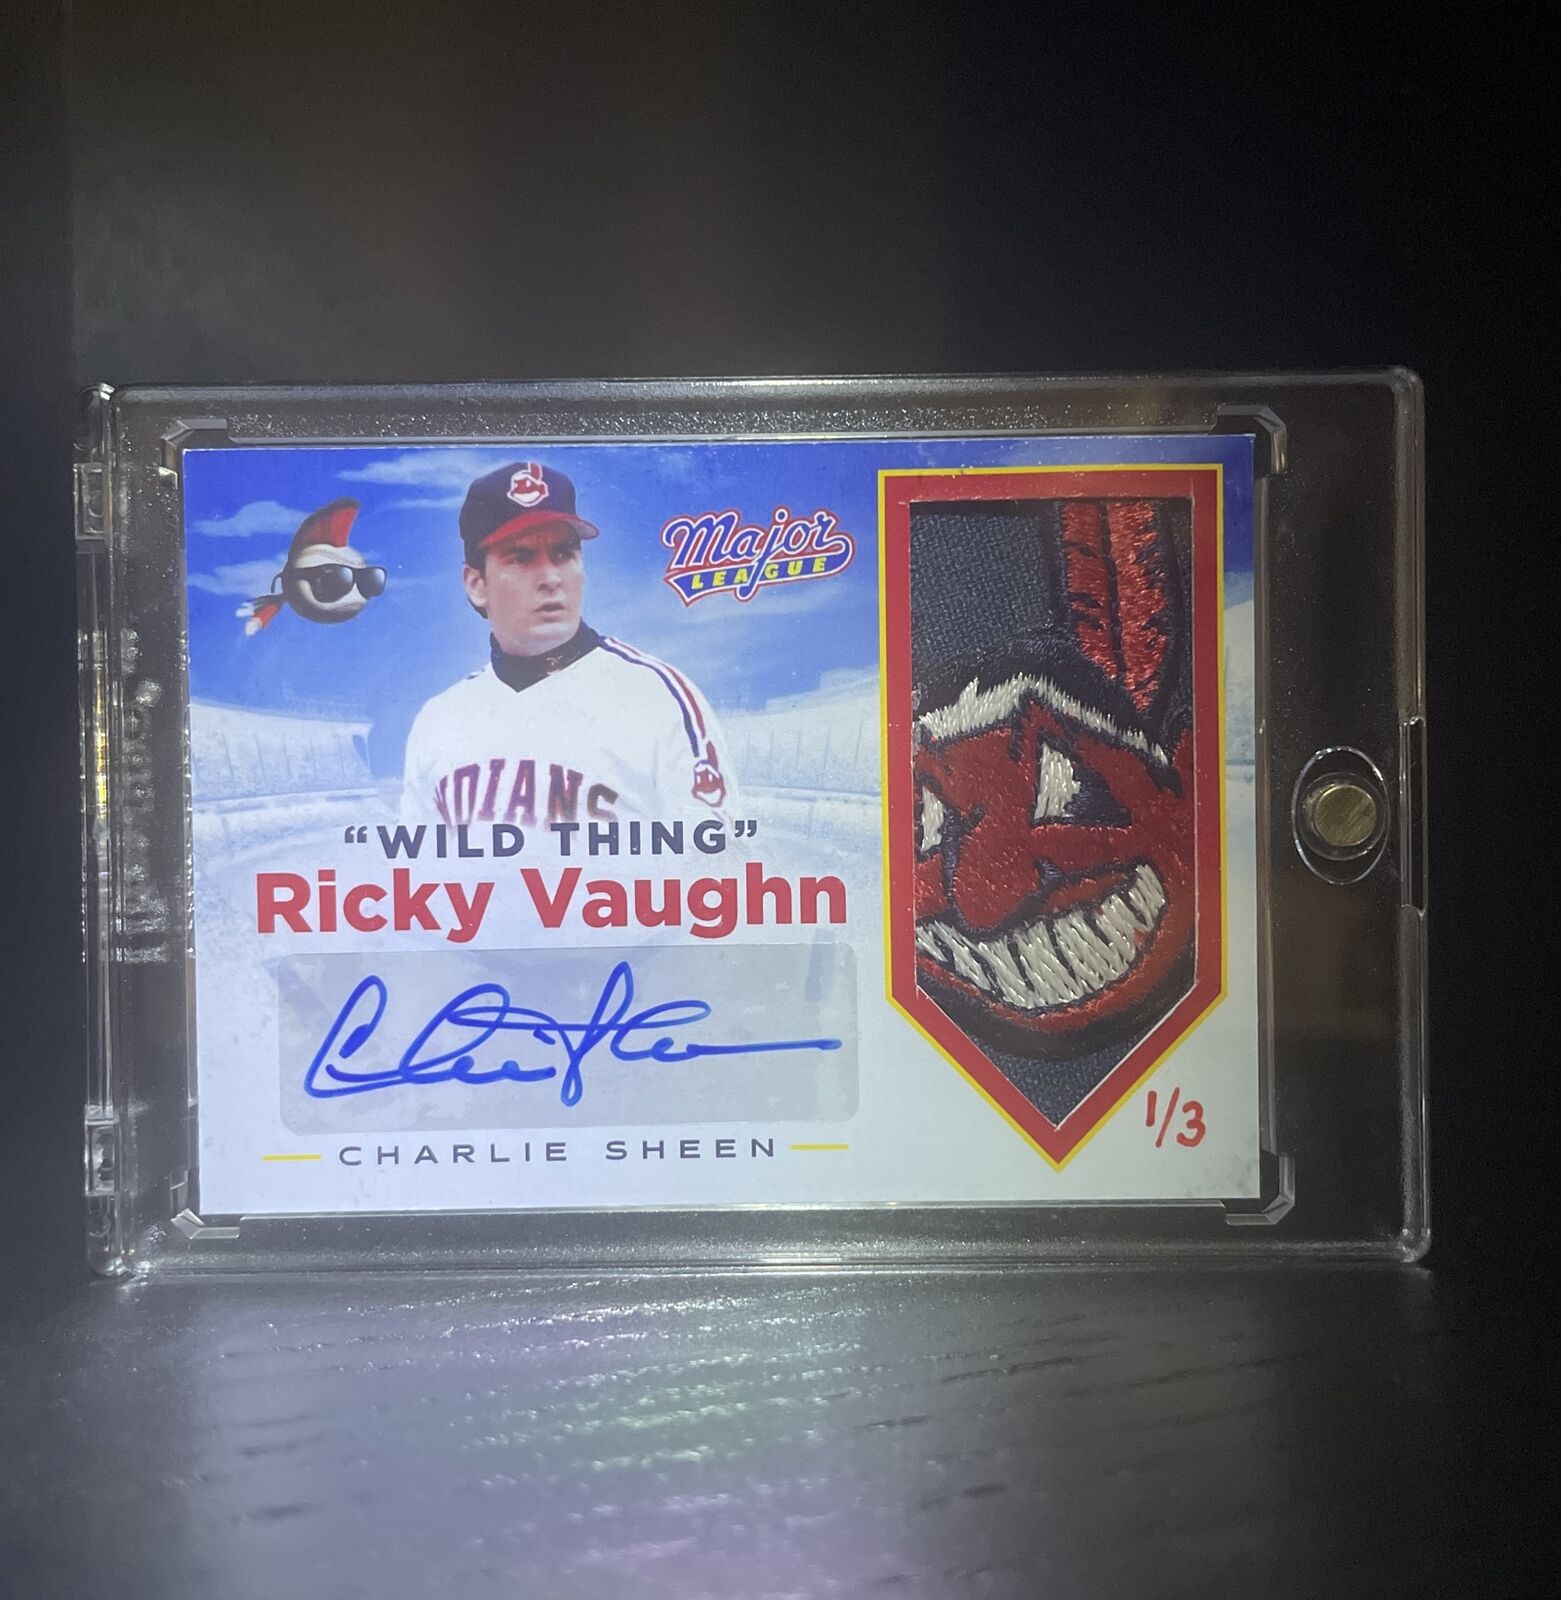 CHARLIE SHEEN Wild Thing Ricky Vaughn Auto Patch 1/3 Major League Indians Wahoo